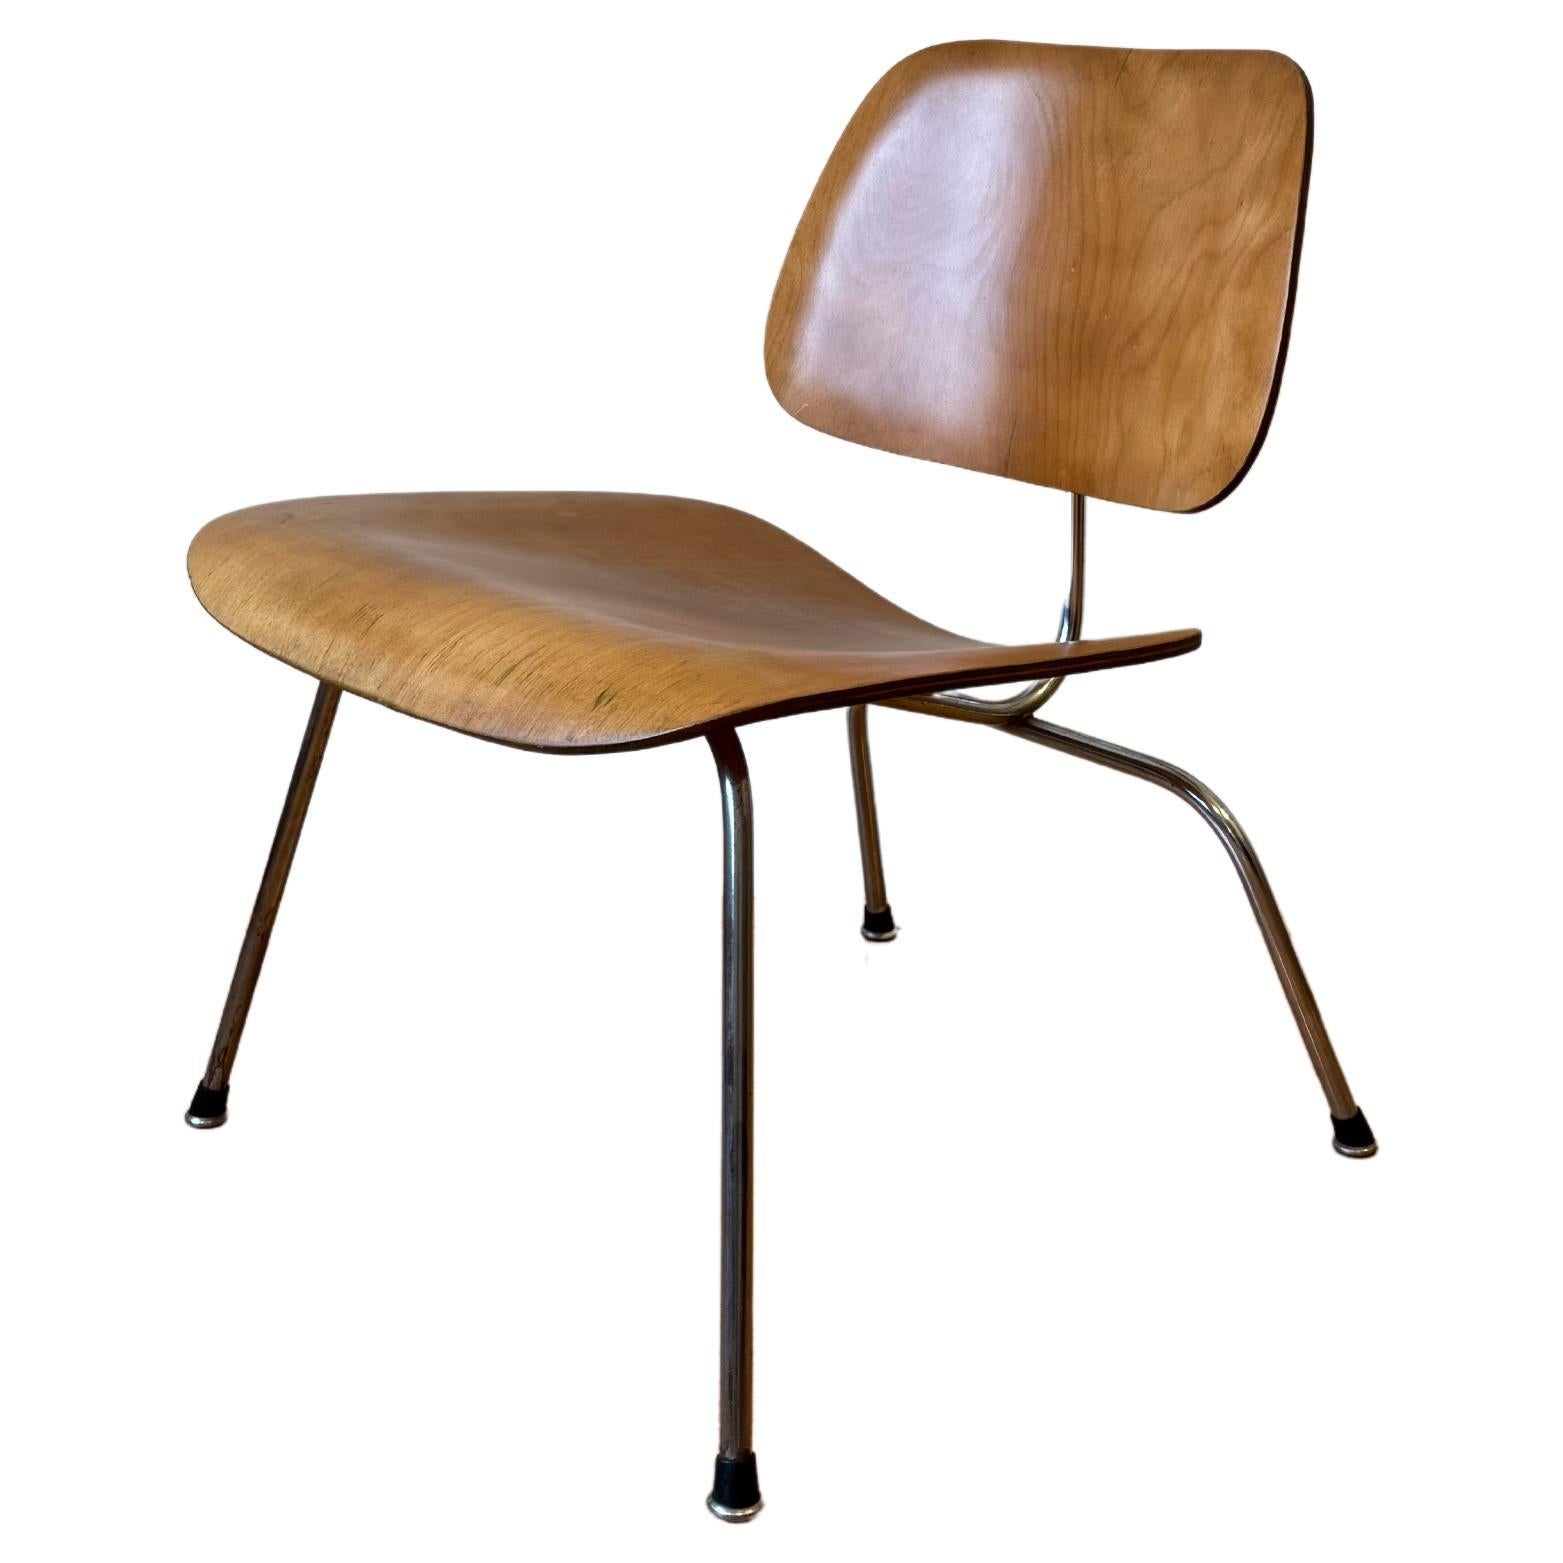 Eames Molded Plywood Lounge Chair Metal Base (LCM), Circa 1950s For Sale